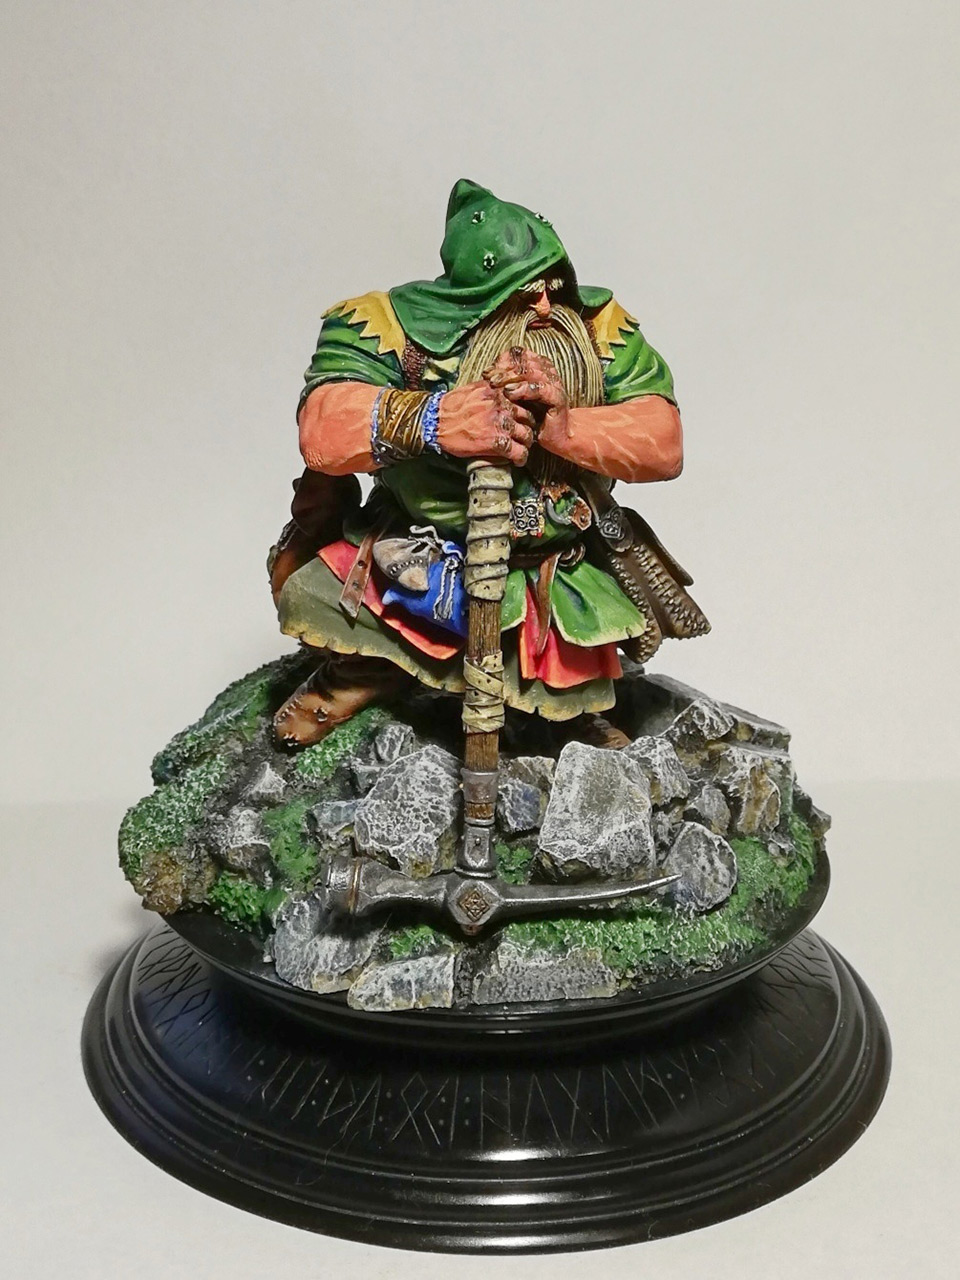 Miscellaneous: Dwarf the Grave Robber, photo #6